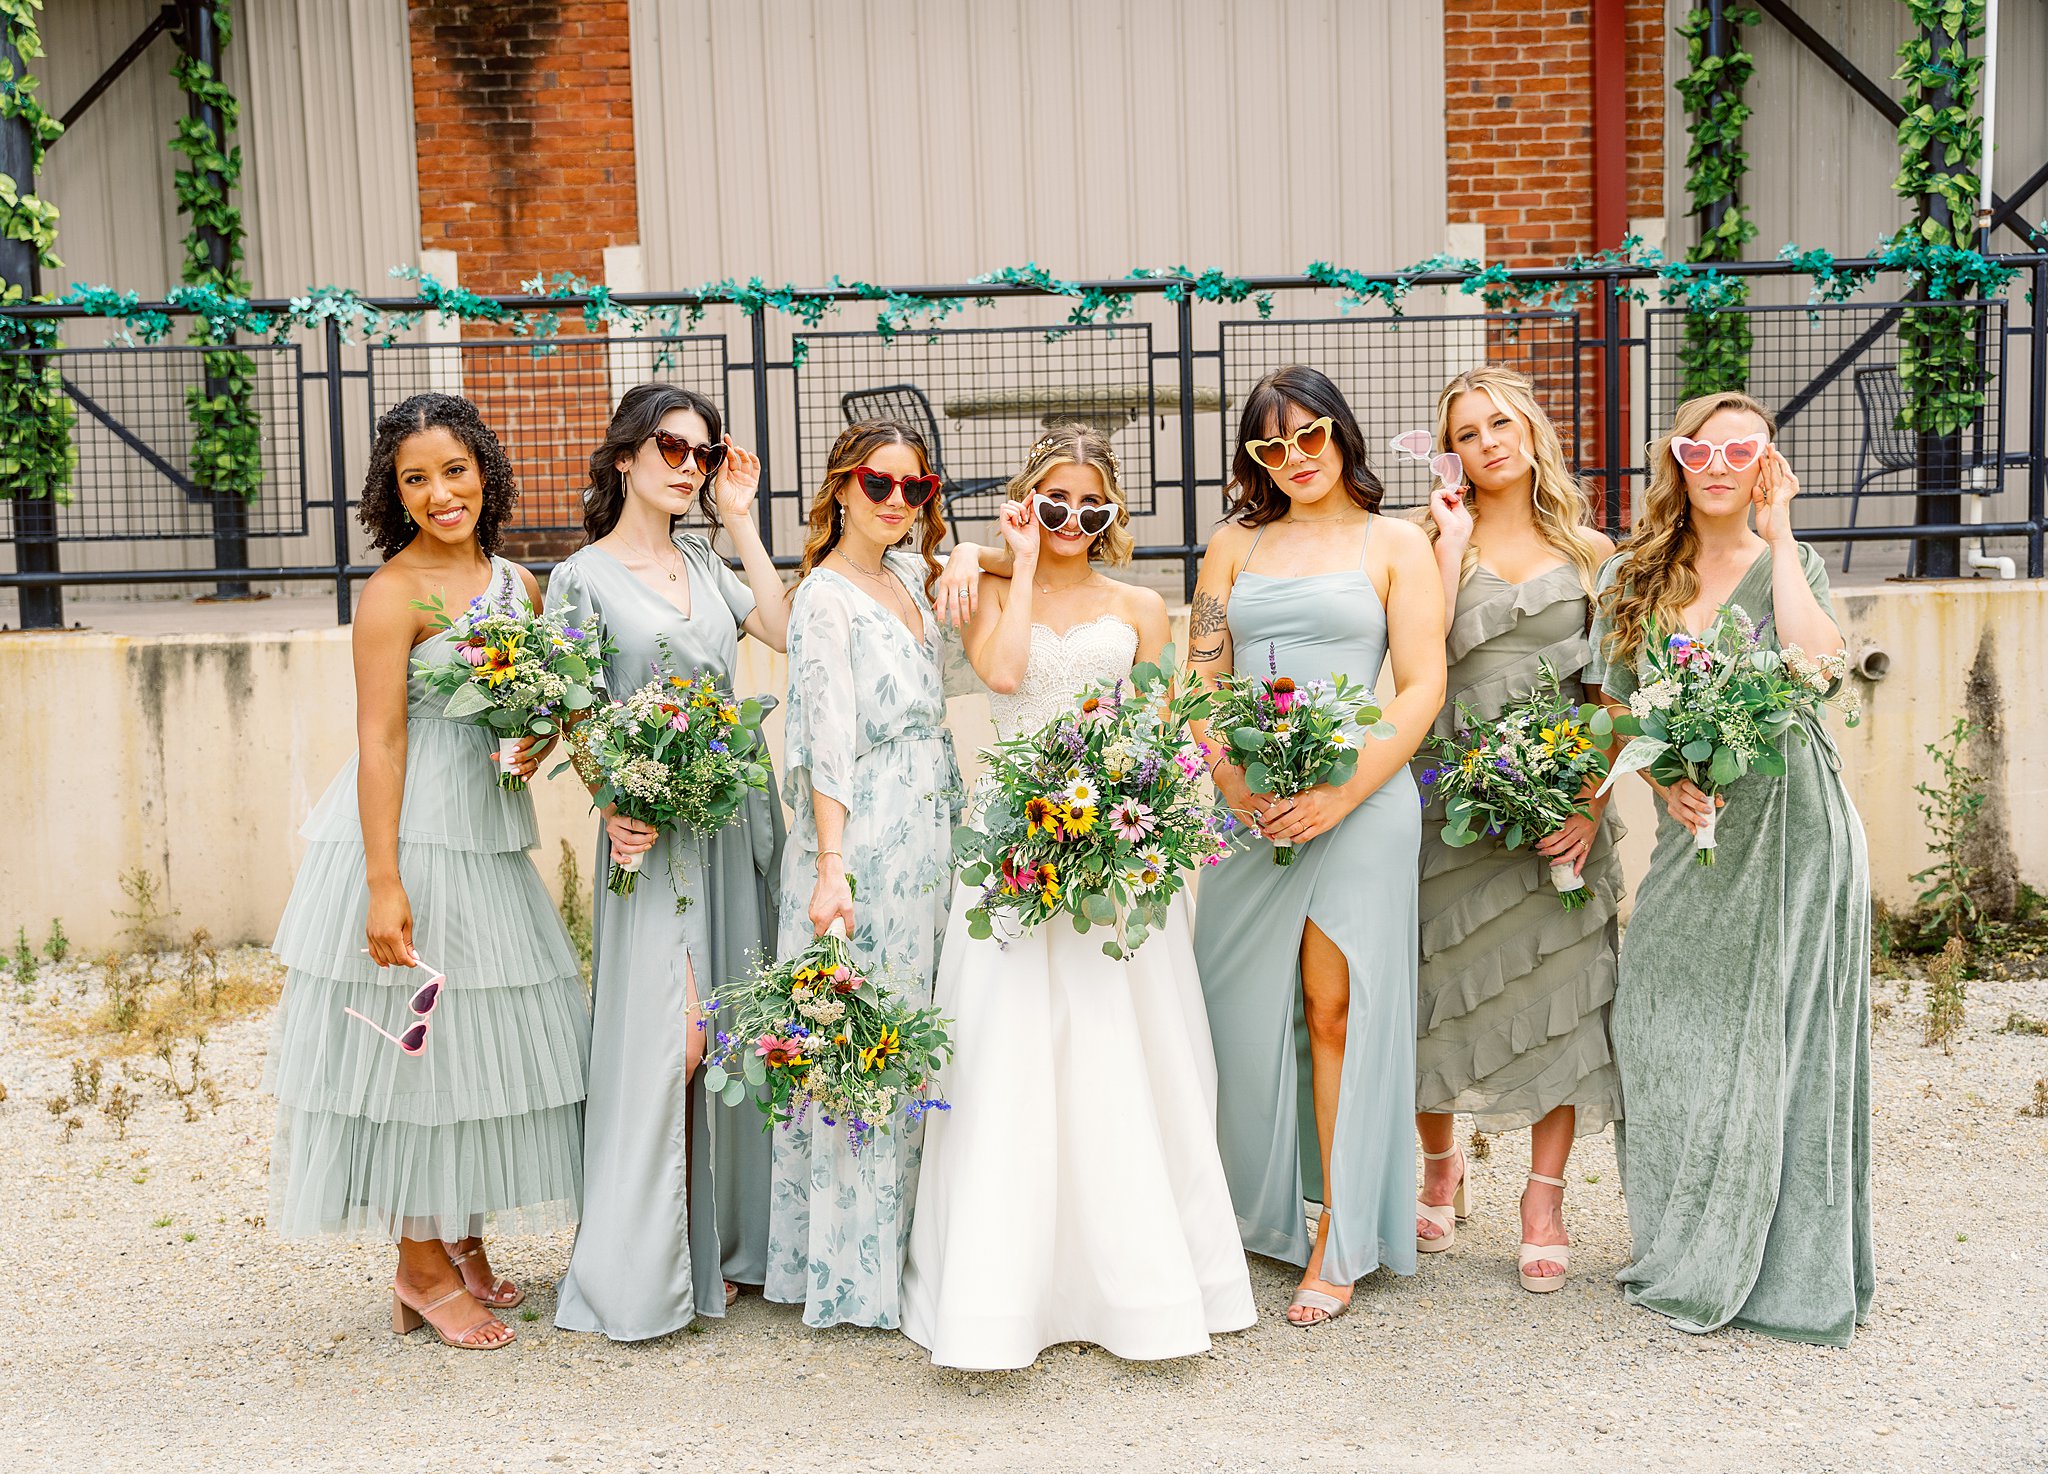 Bridal party in green dresses and heart shaped sunglasses stand outside a modern industrial building unique wedding venues dayton ohio